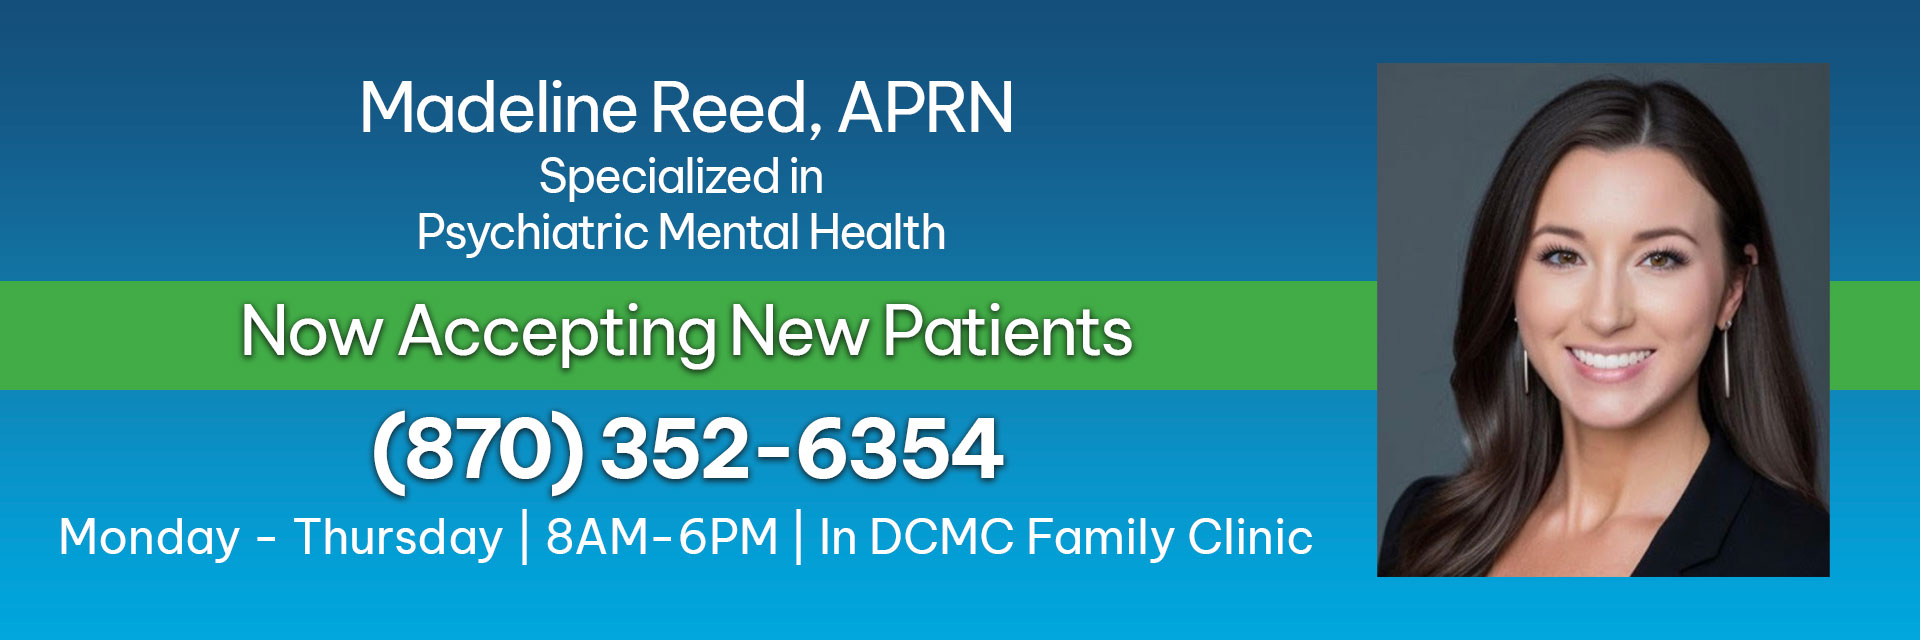 Madeline Reed, APRN 
Specialized in Psychiatric Mental Health
Now Accepting Patients 
(870)352-6354
Monday - Thursday | 8AM-6PM | In DCMC Family Clinic